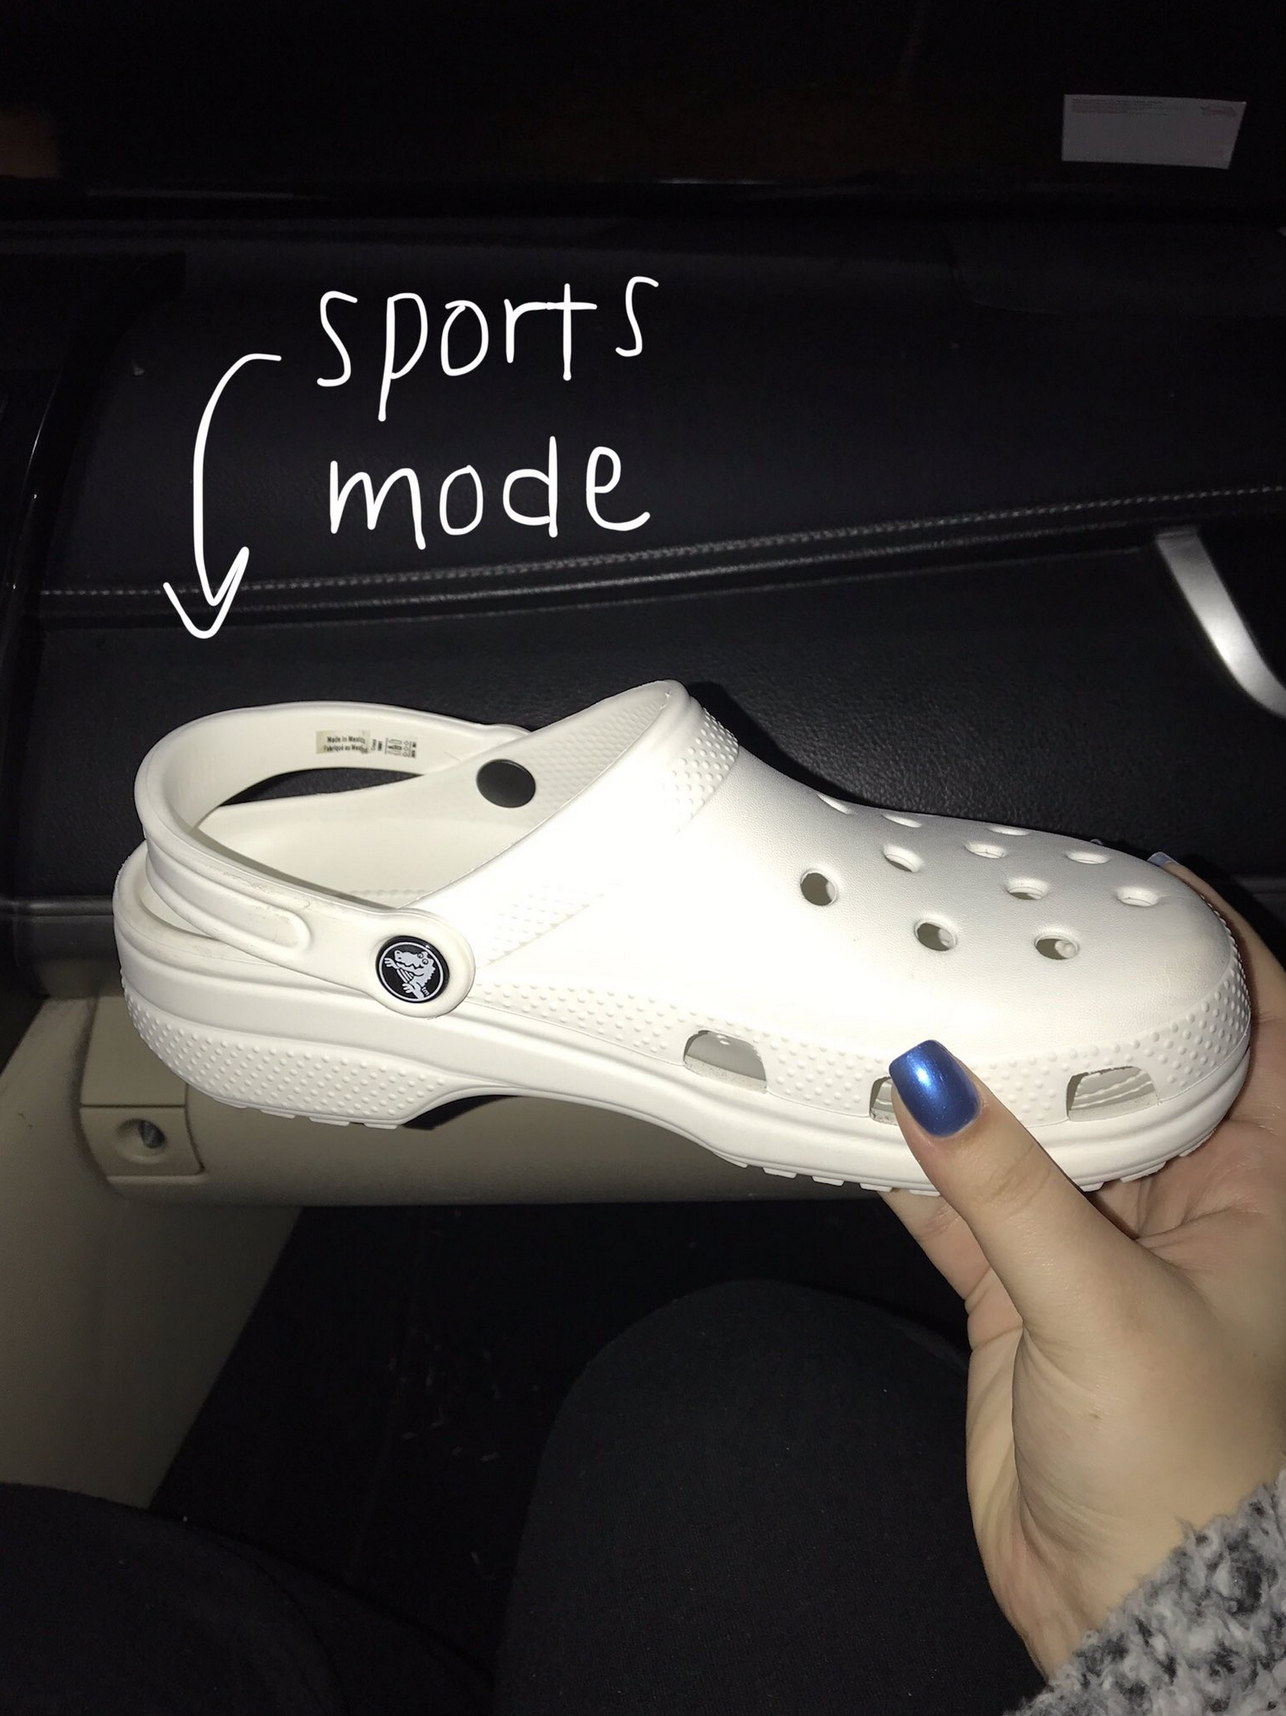 what are the things called you put on crocs